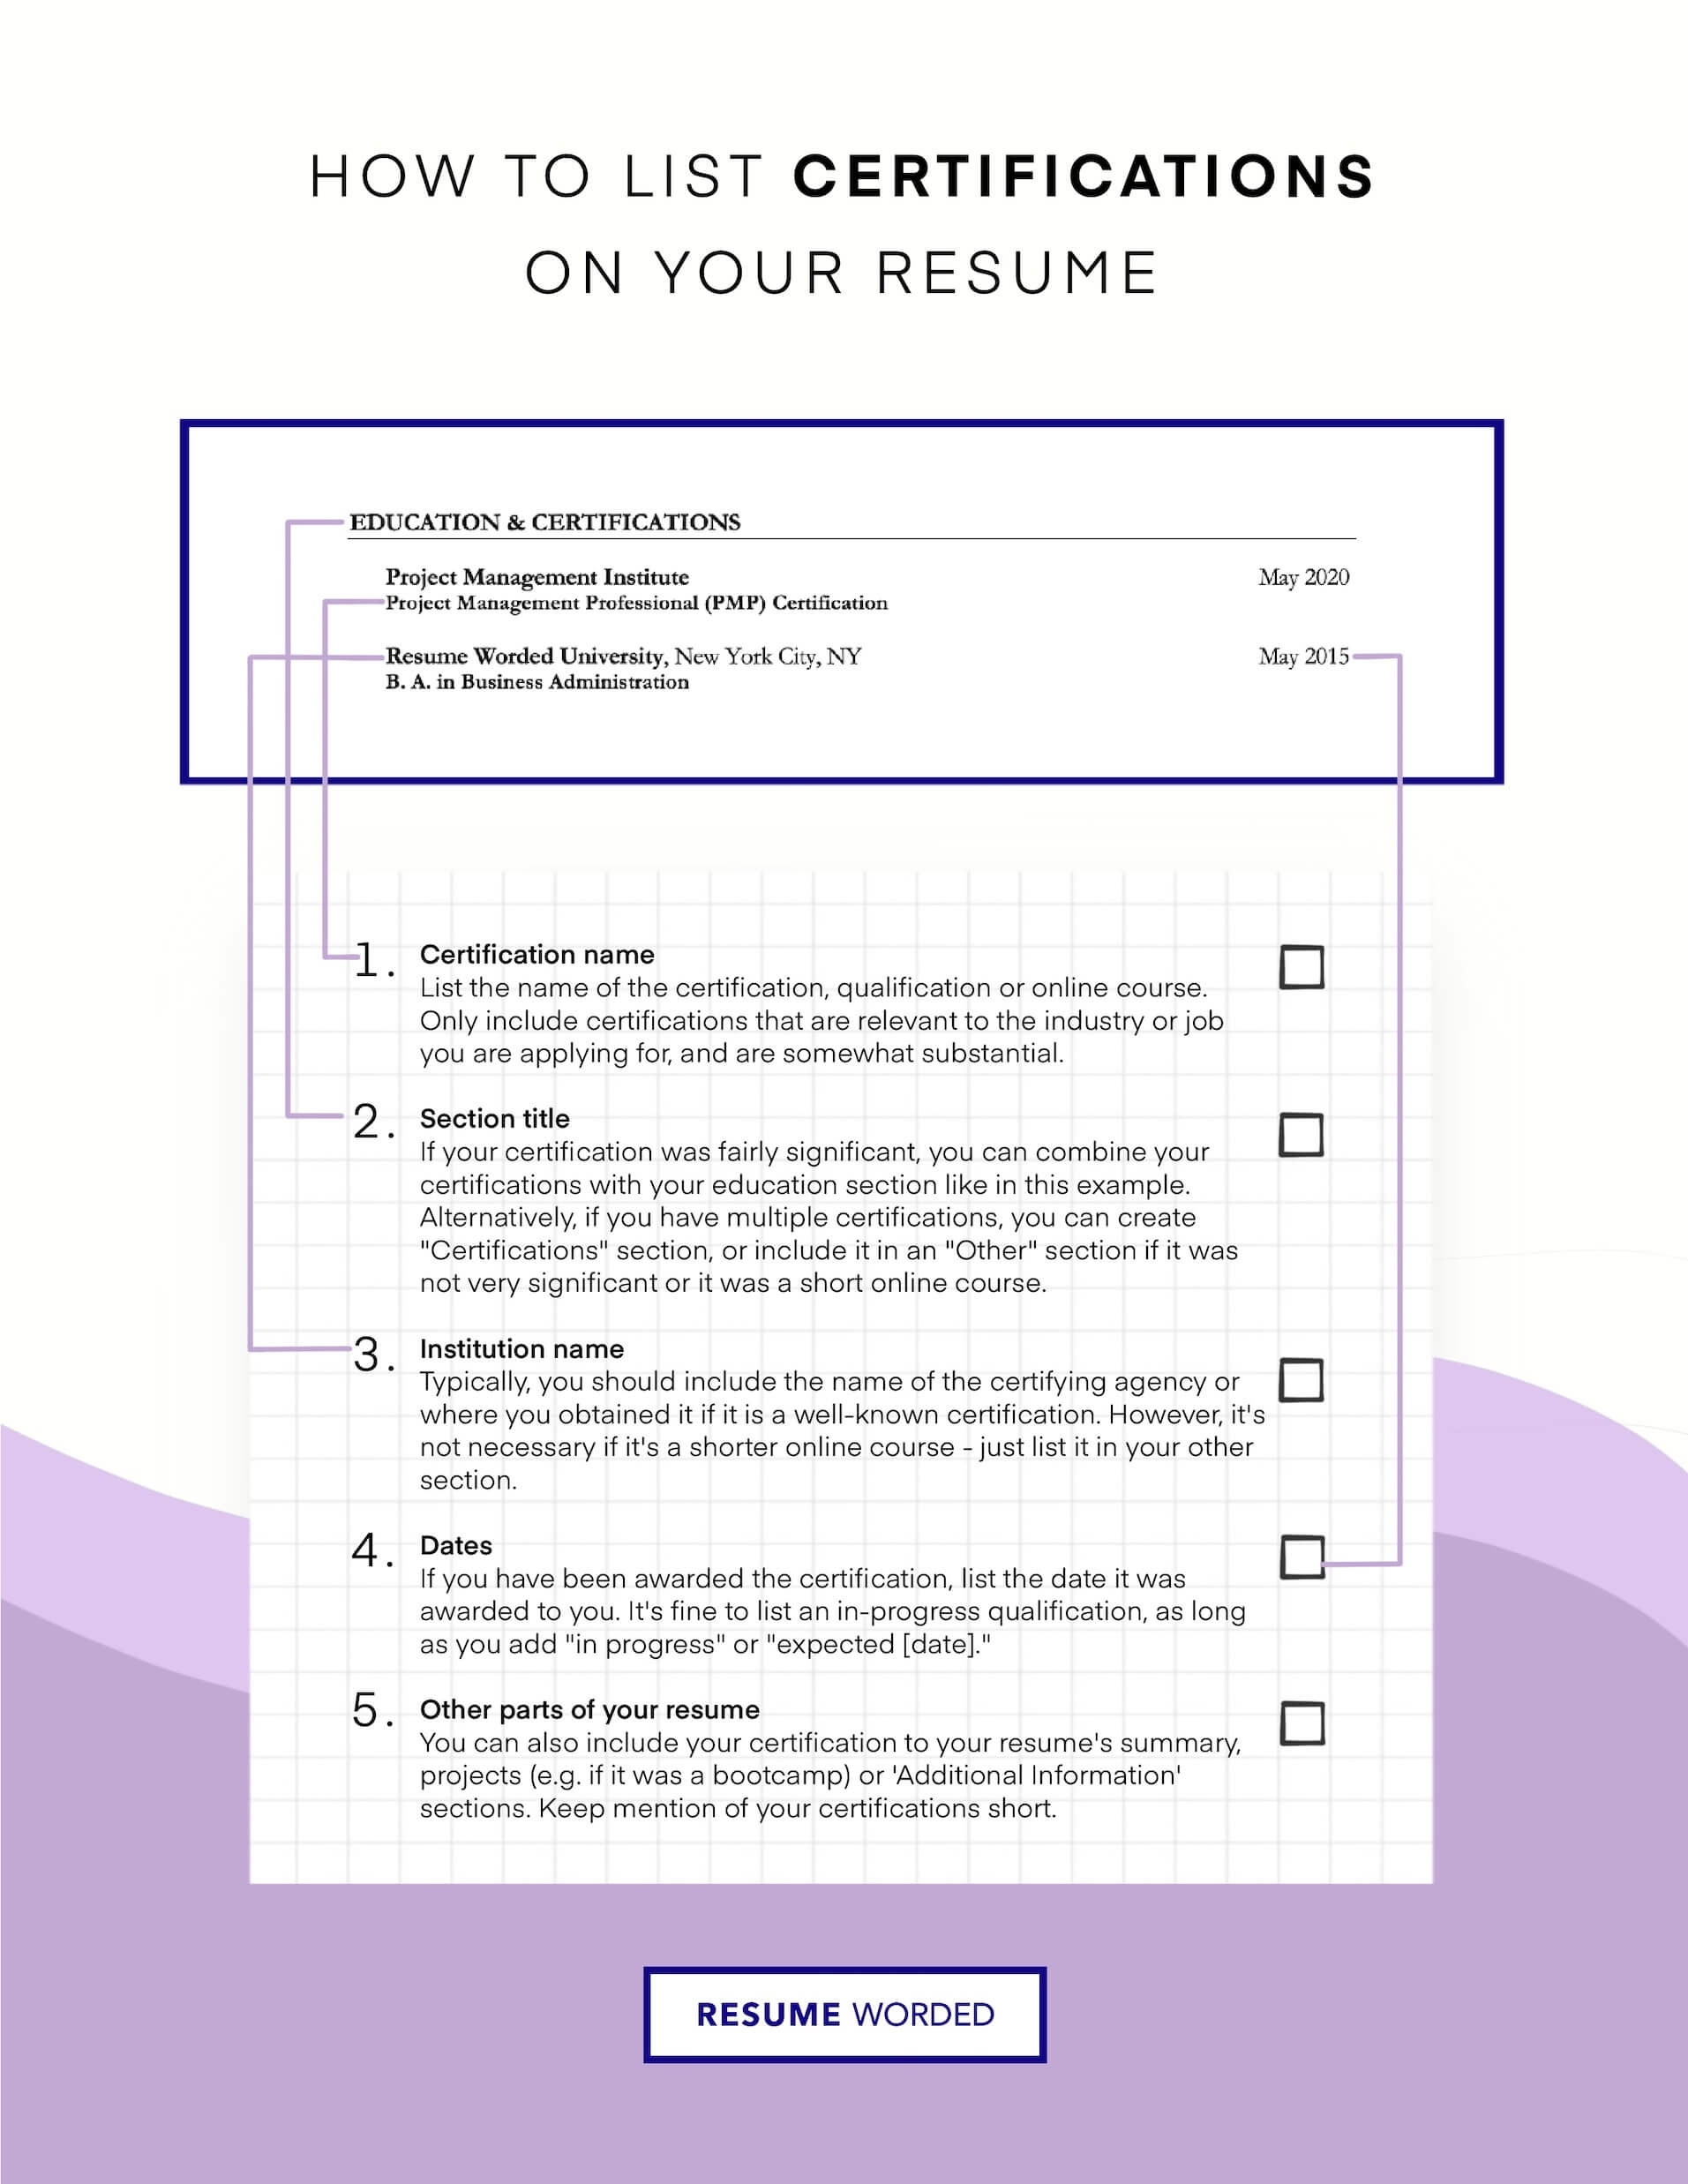 Lead with your qualifications. - Entry-Level Java Developer Resume